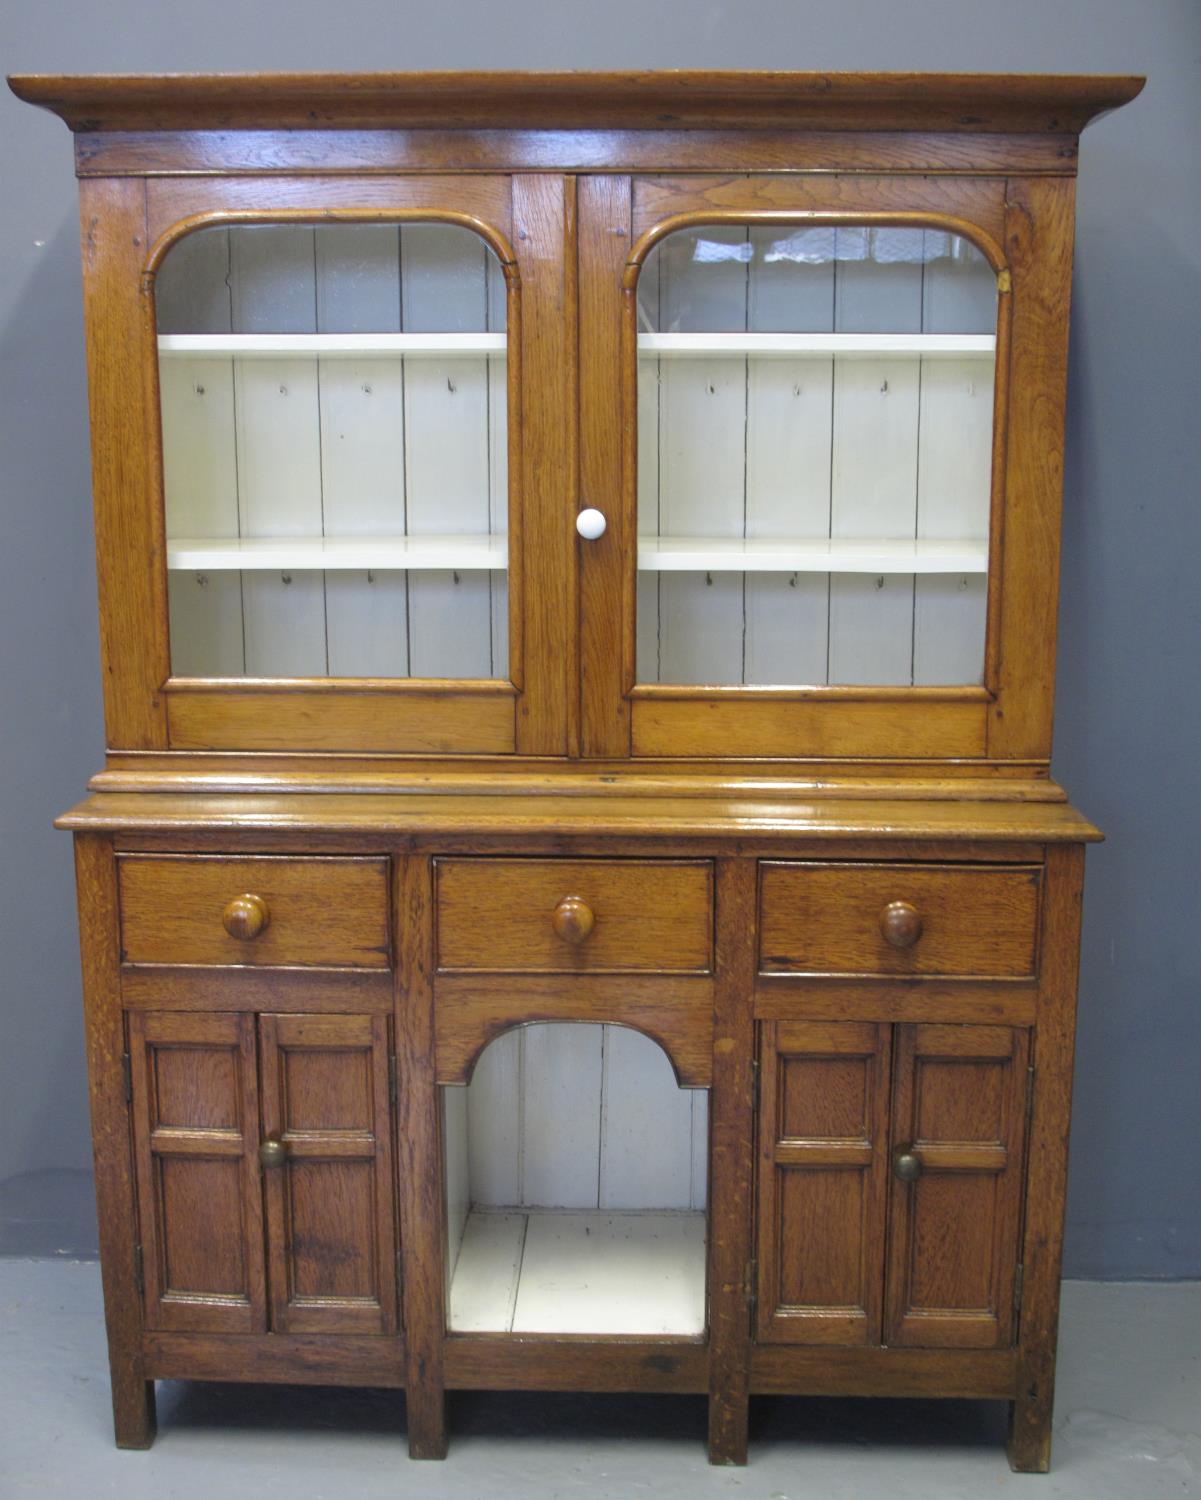 UNUSUAL LATE VICTORIAN PALE OAK TWO STAGE CABINET BACK DOG KENNEL DRESSER of small proportions